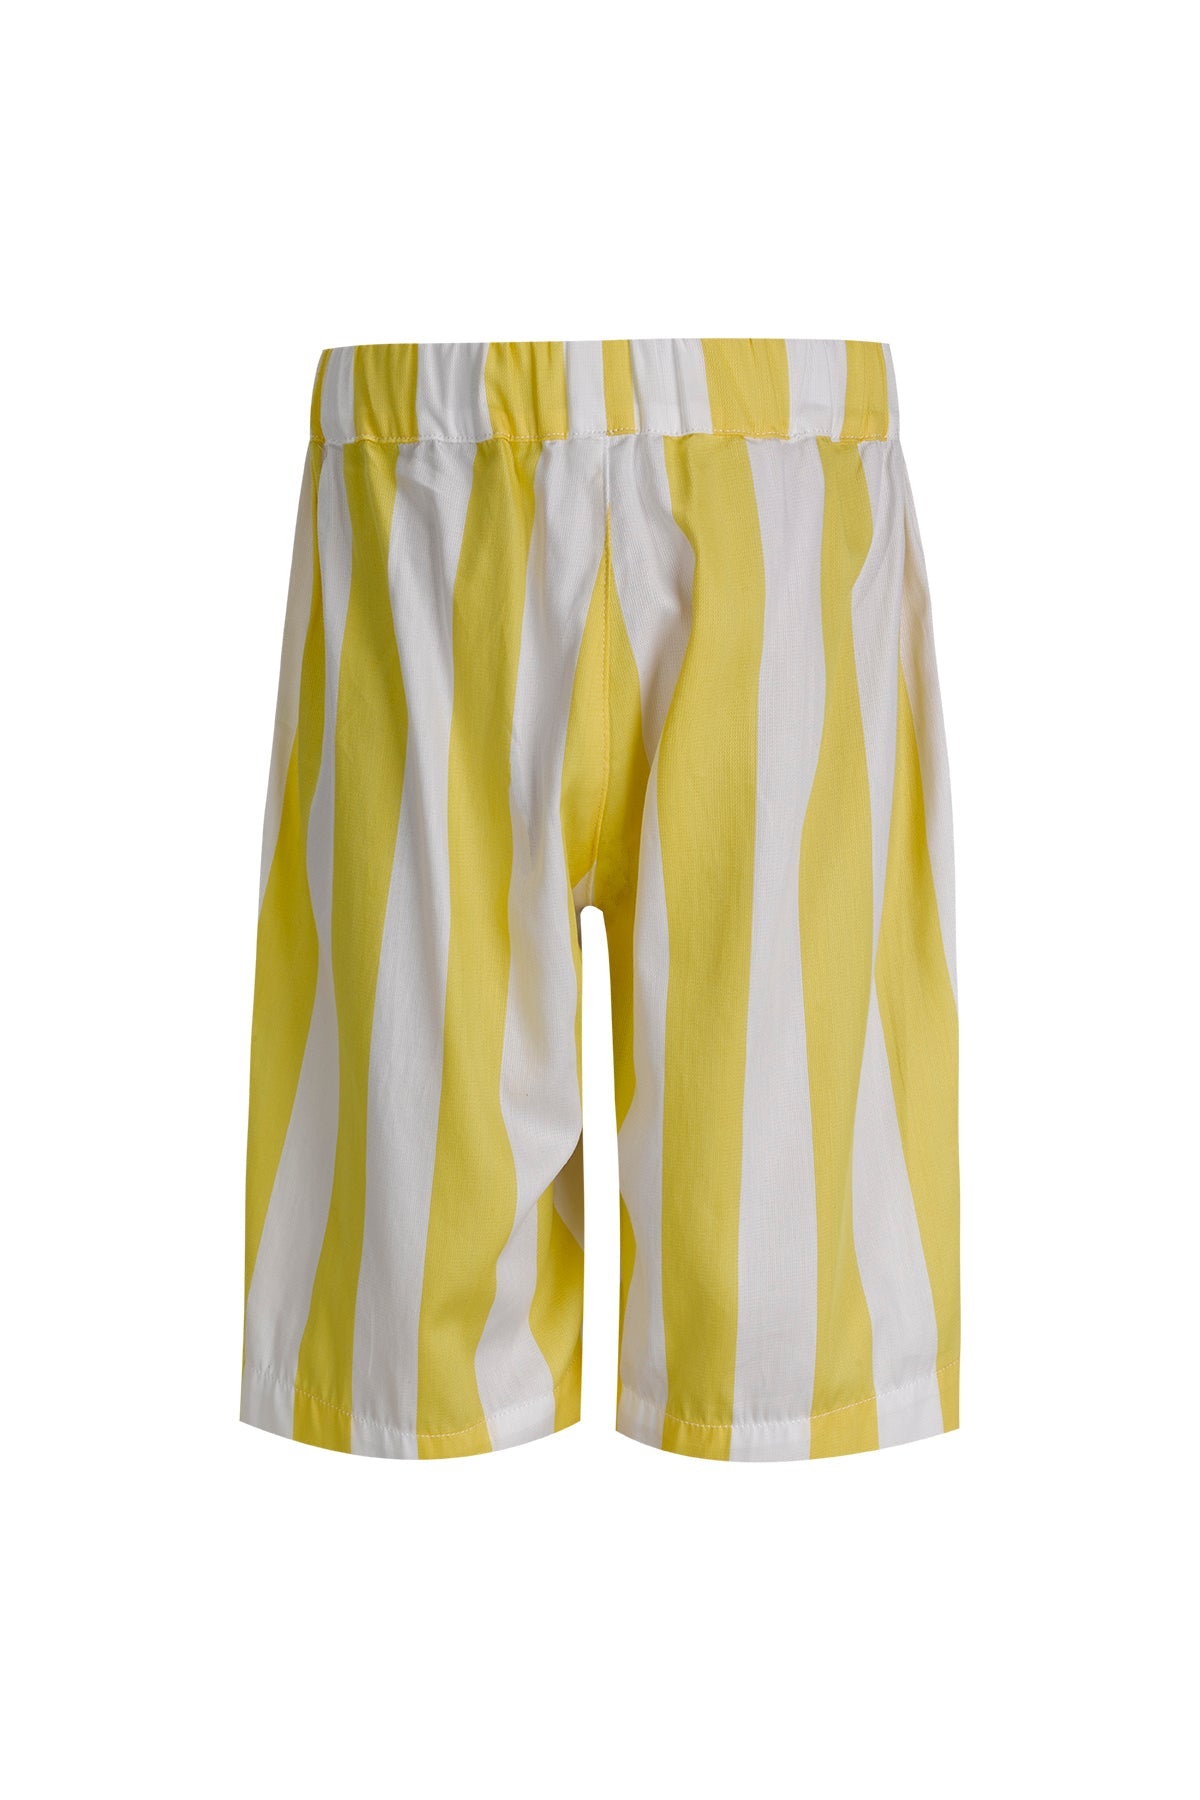 YELLOW AND WHITE STRIPED SHORTS